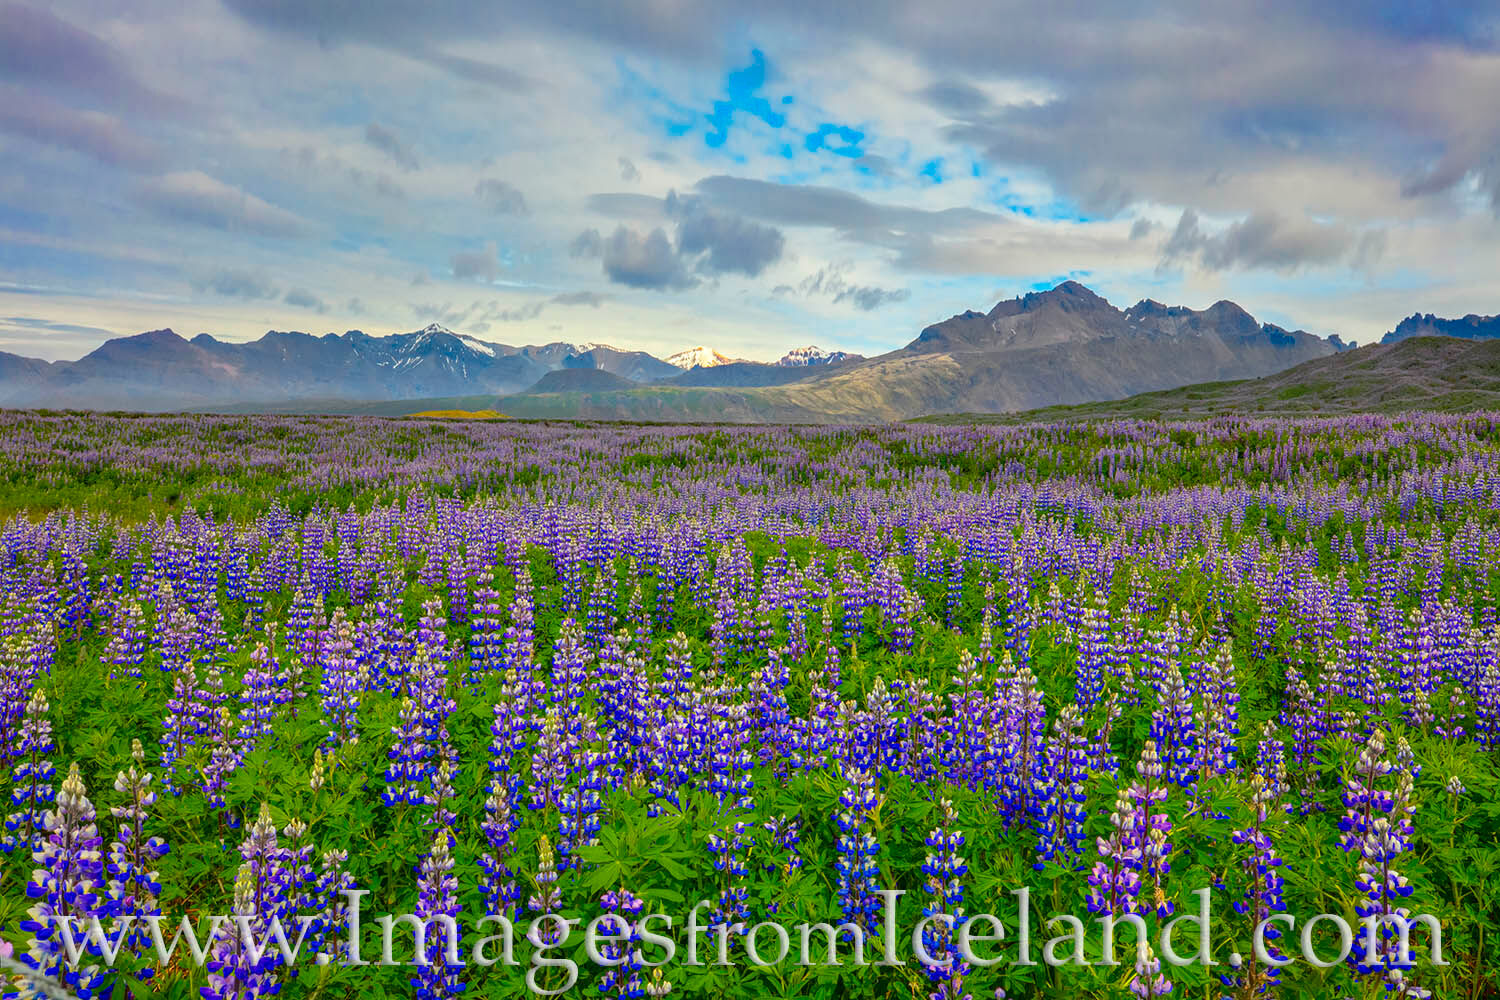 Along the south coast of Iceland, lupine bloom in late June and July. This photograph was taken just off the ring road on a summer...